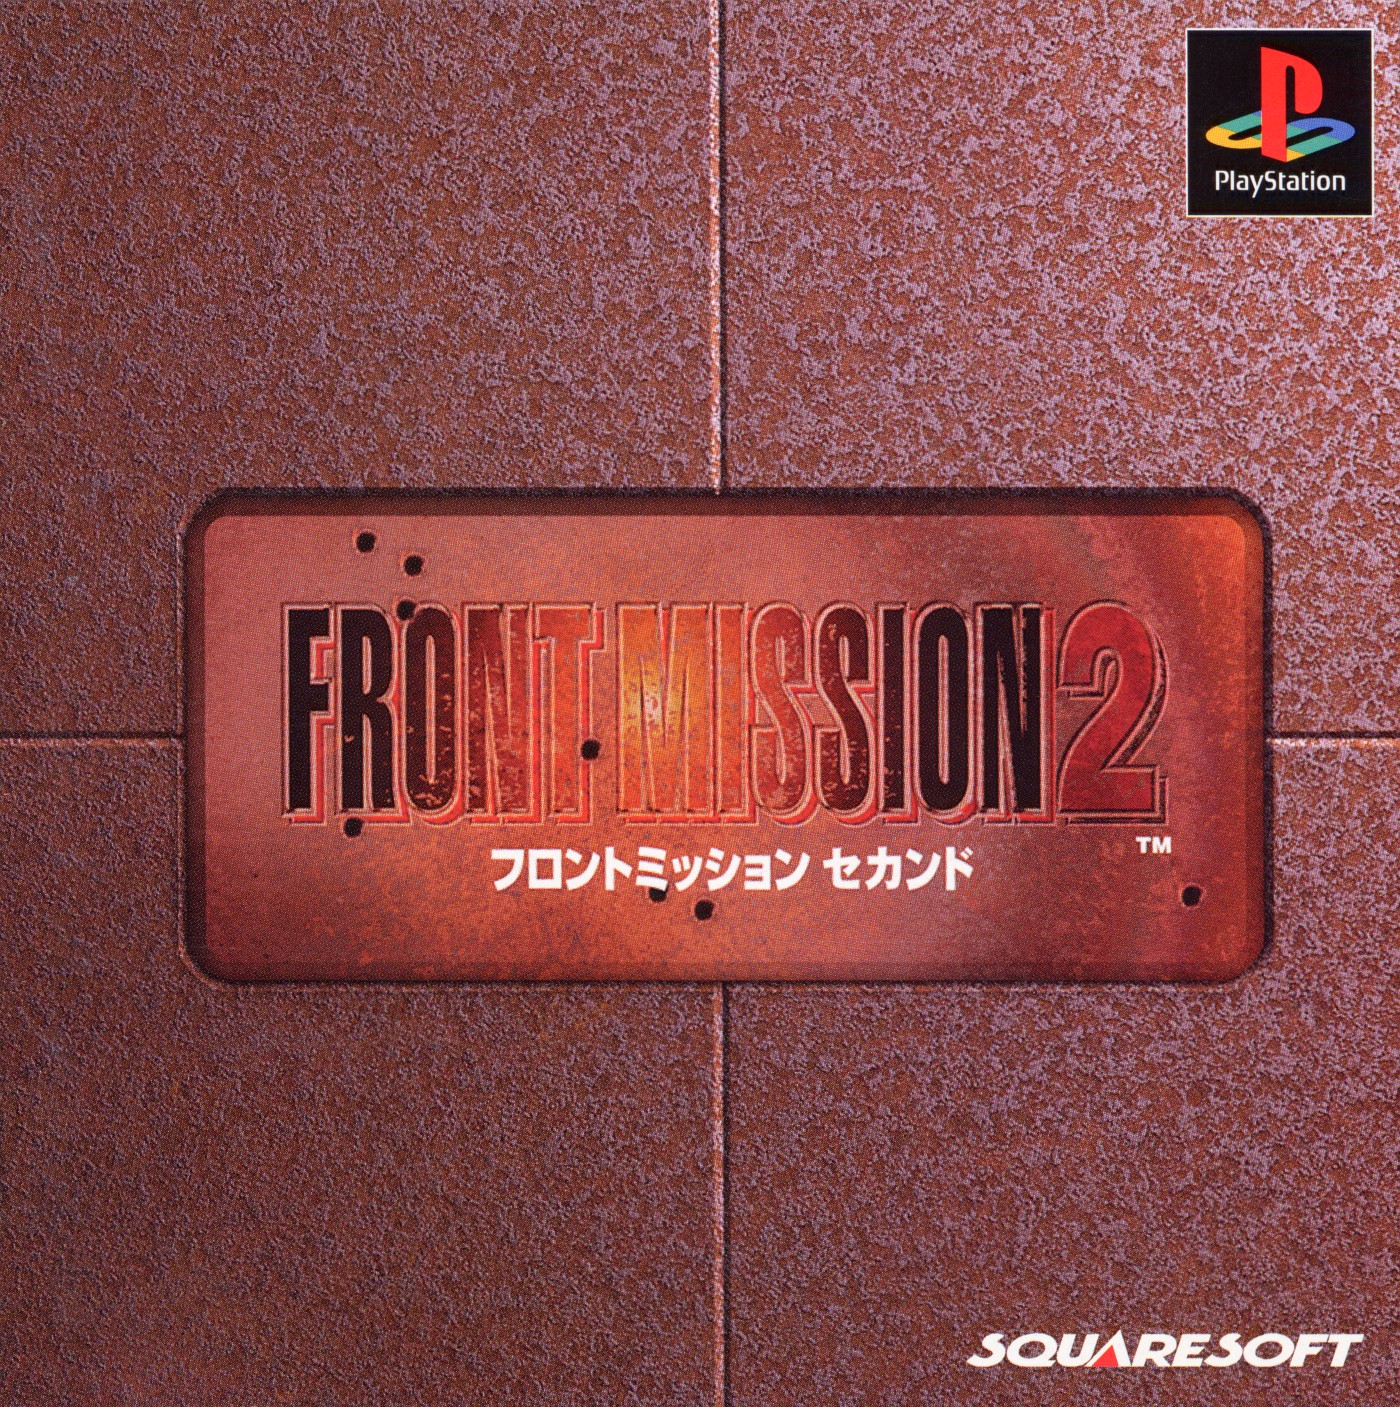 download front mission playstation 1